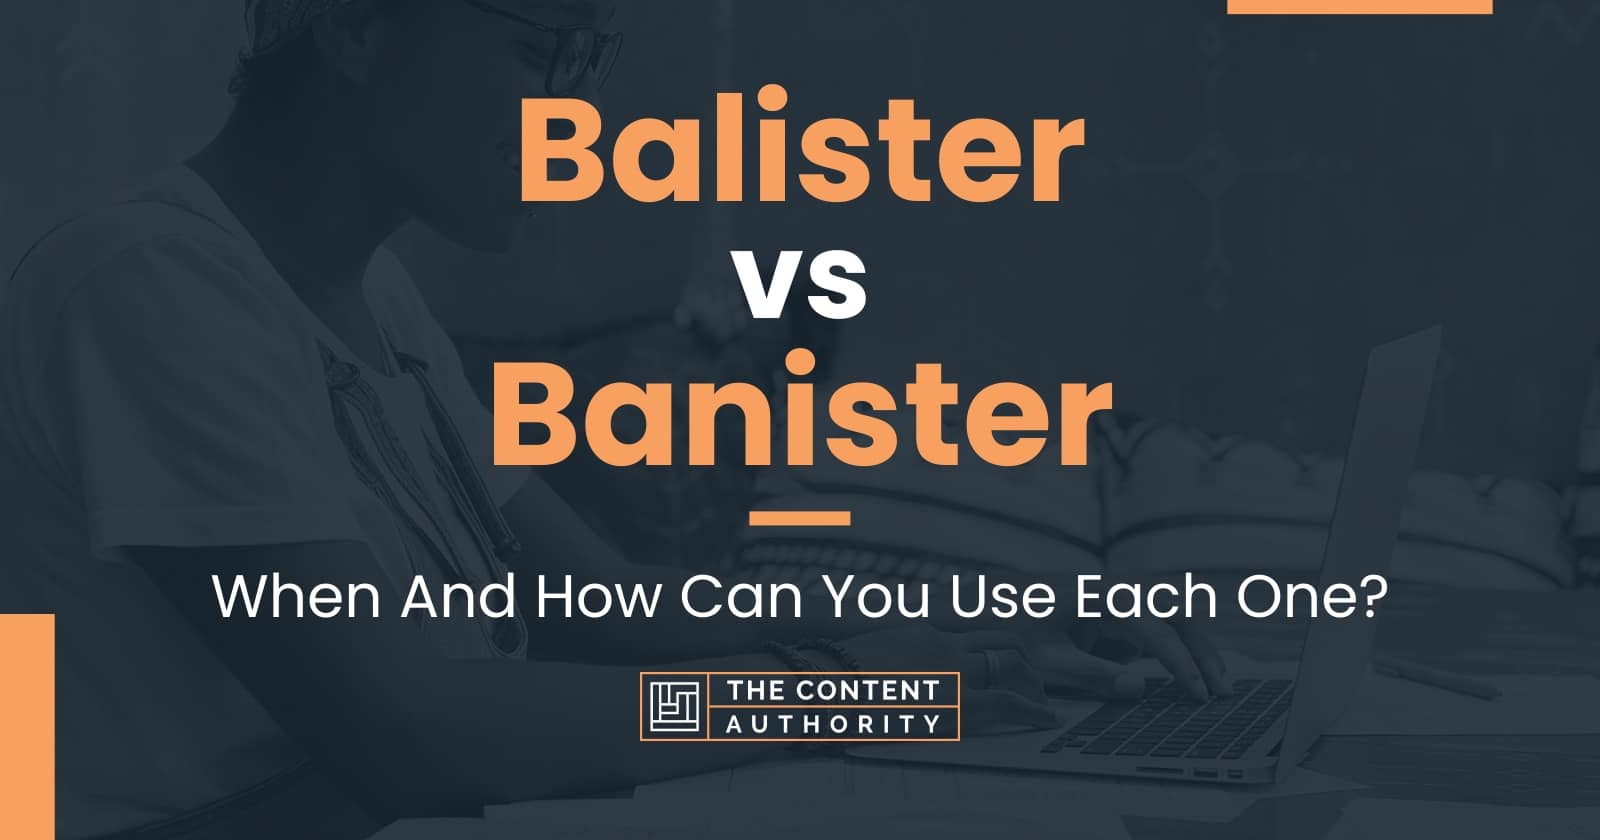 Balister vs Banister: When And How Can You Use Each One?